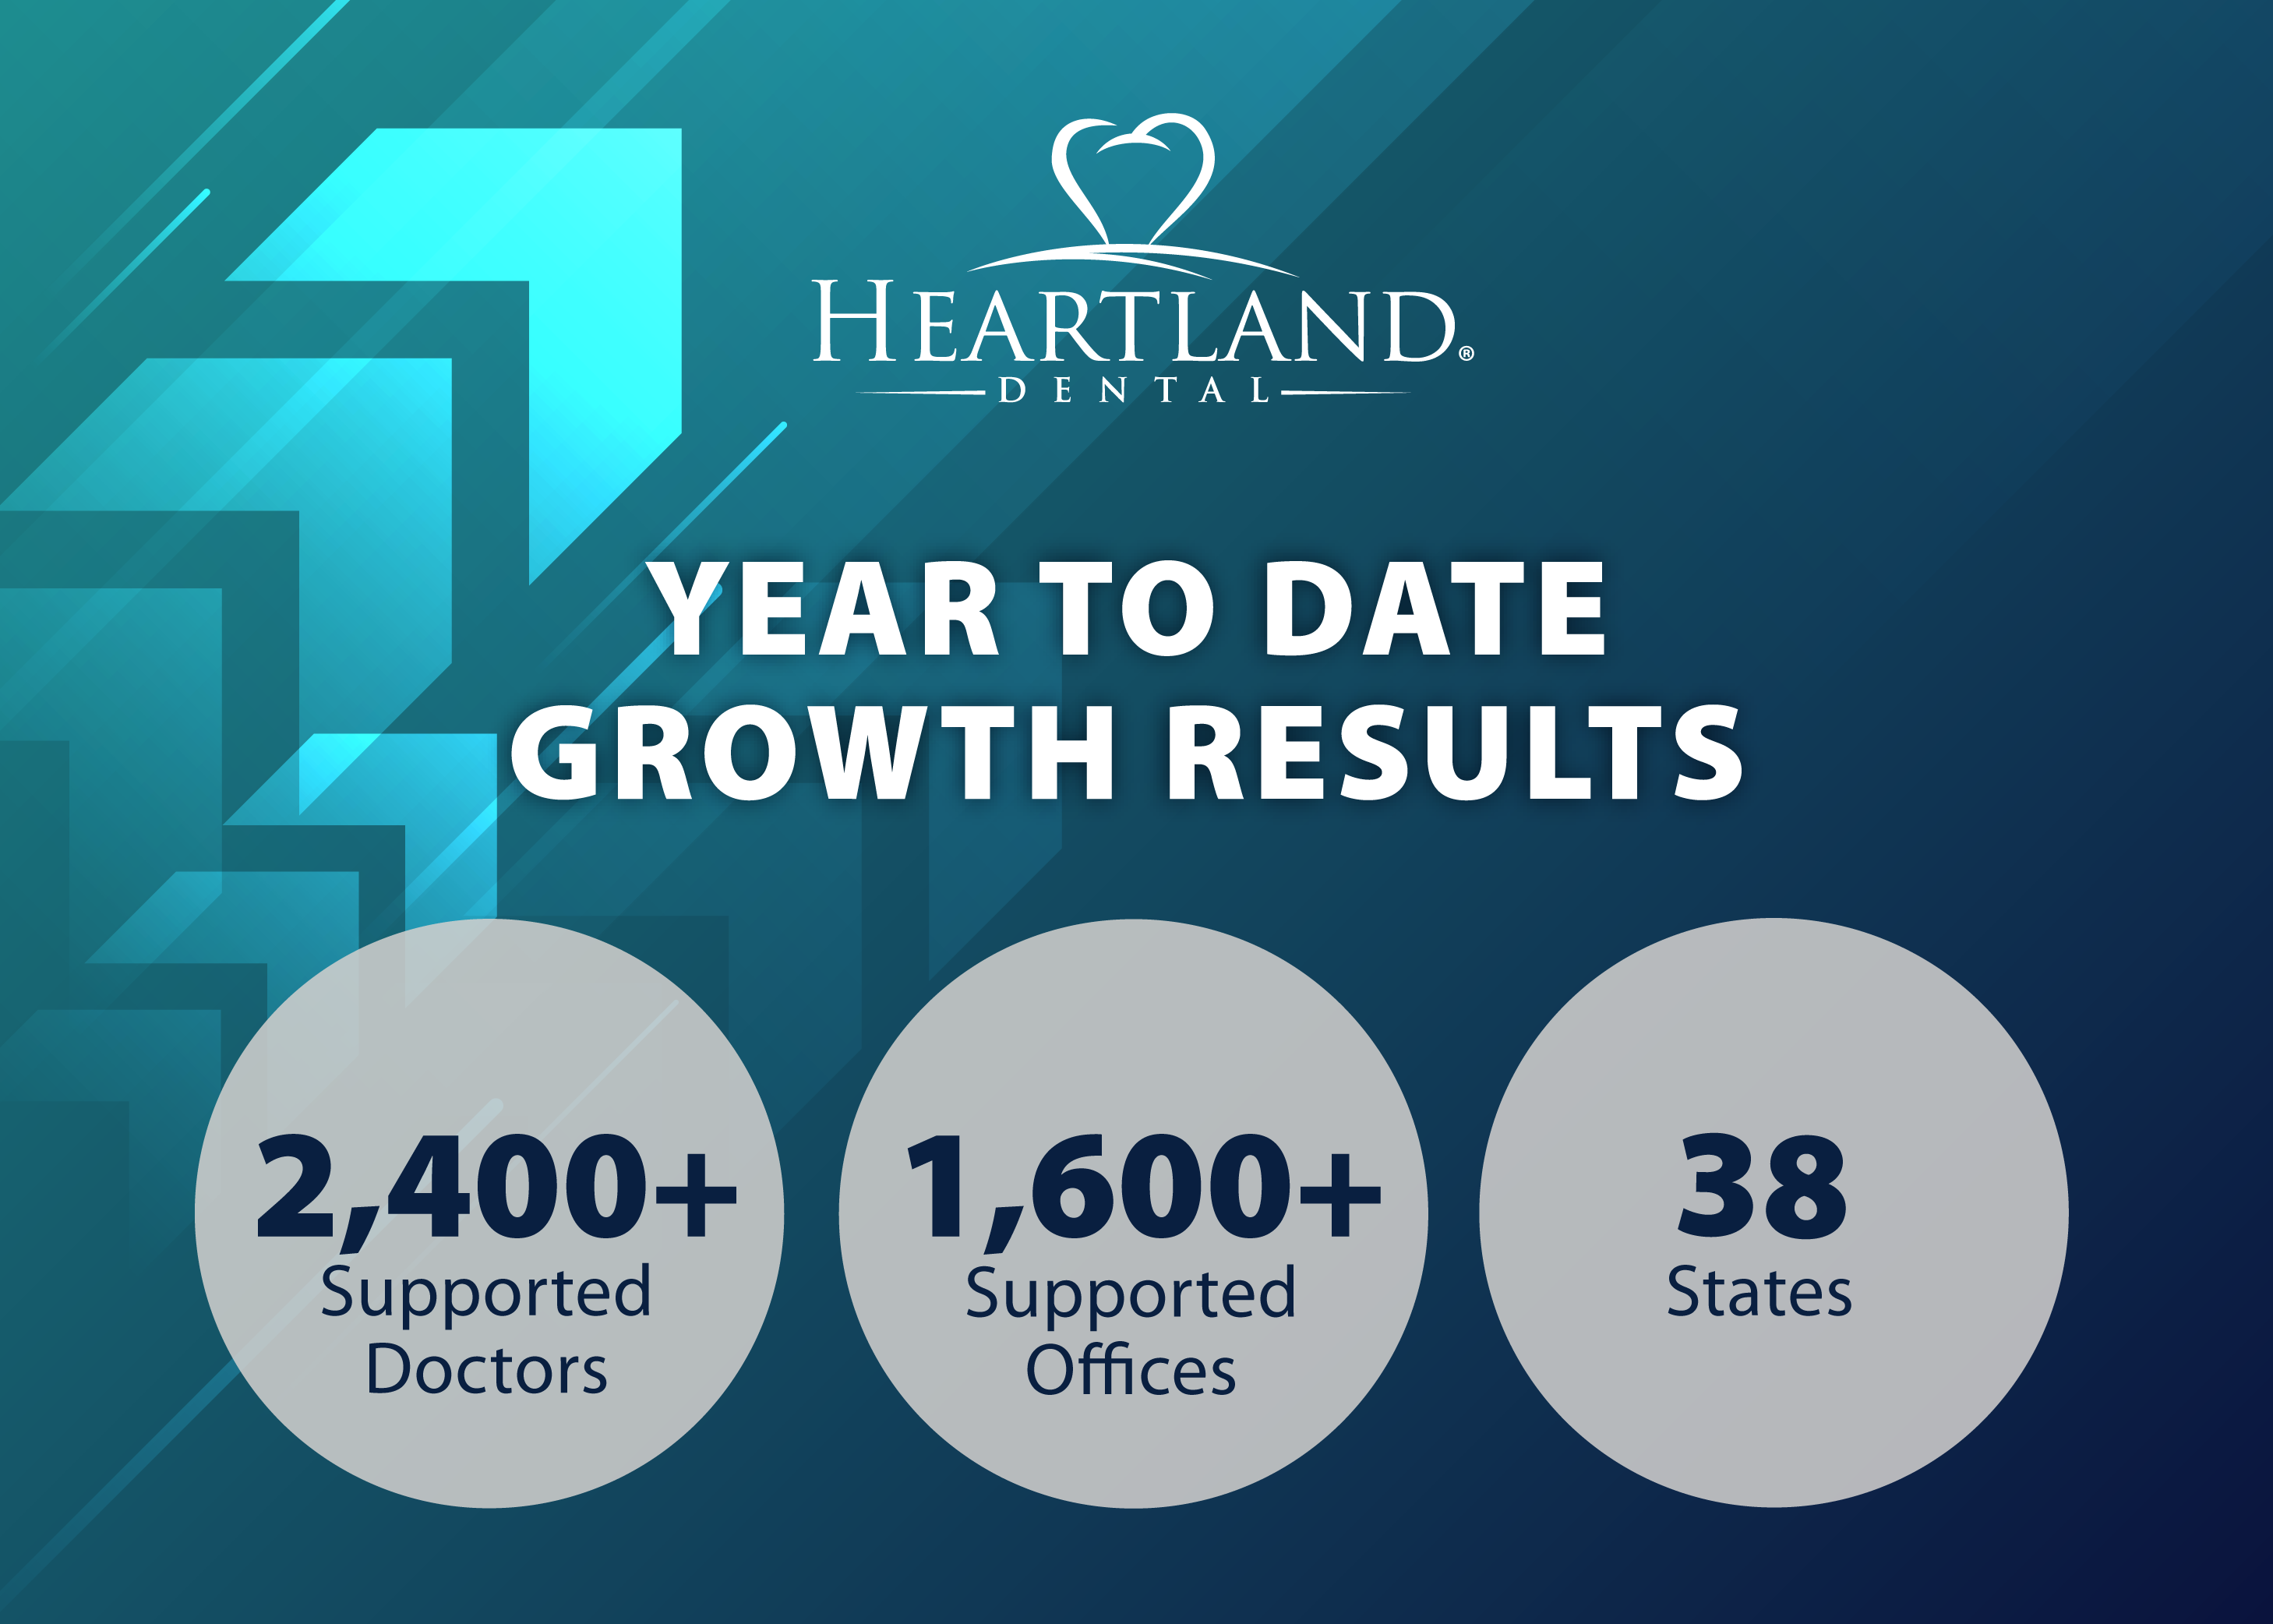 Heartland Dental Releases Year to Date Growth Results